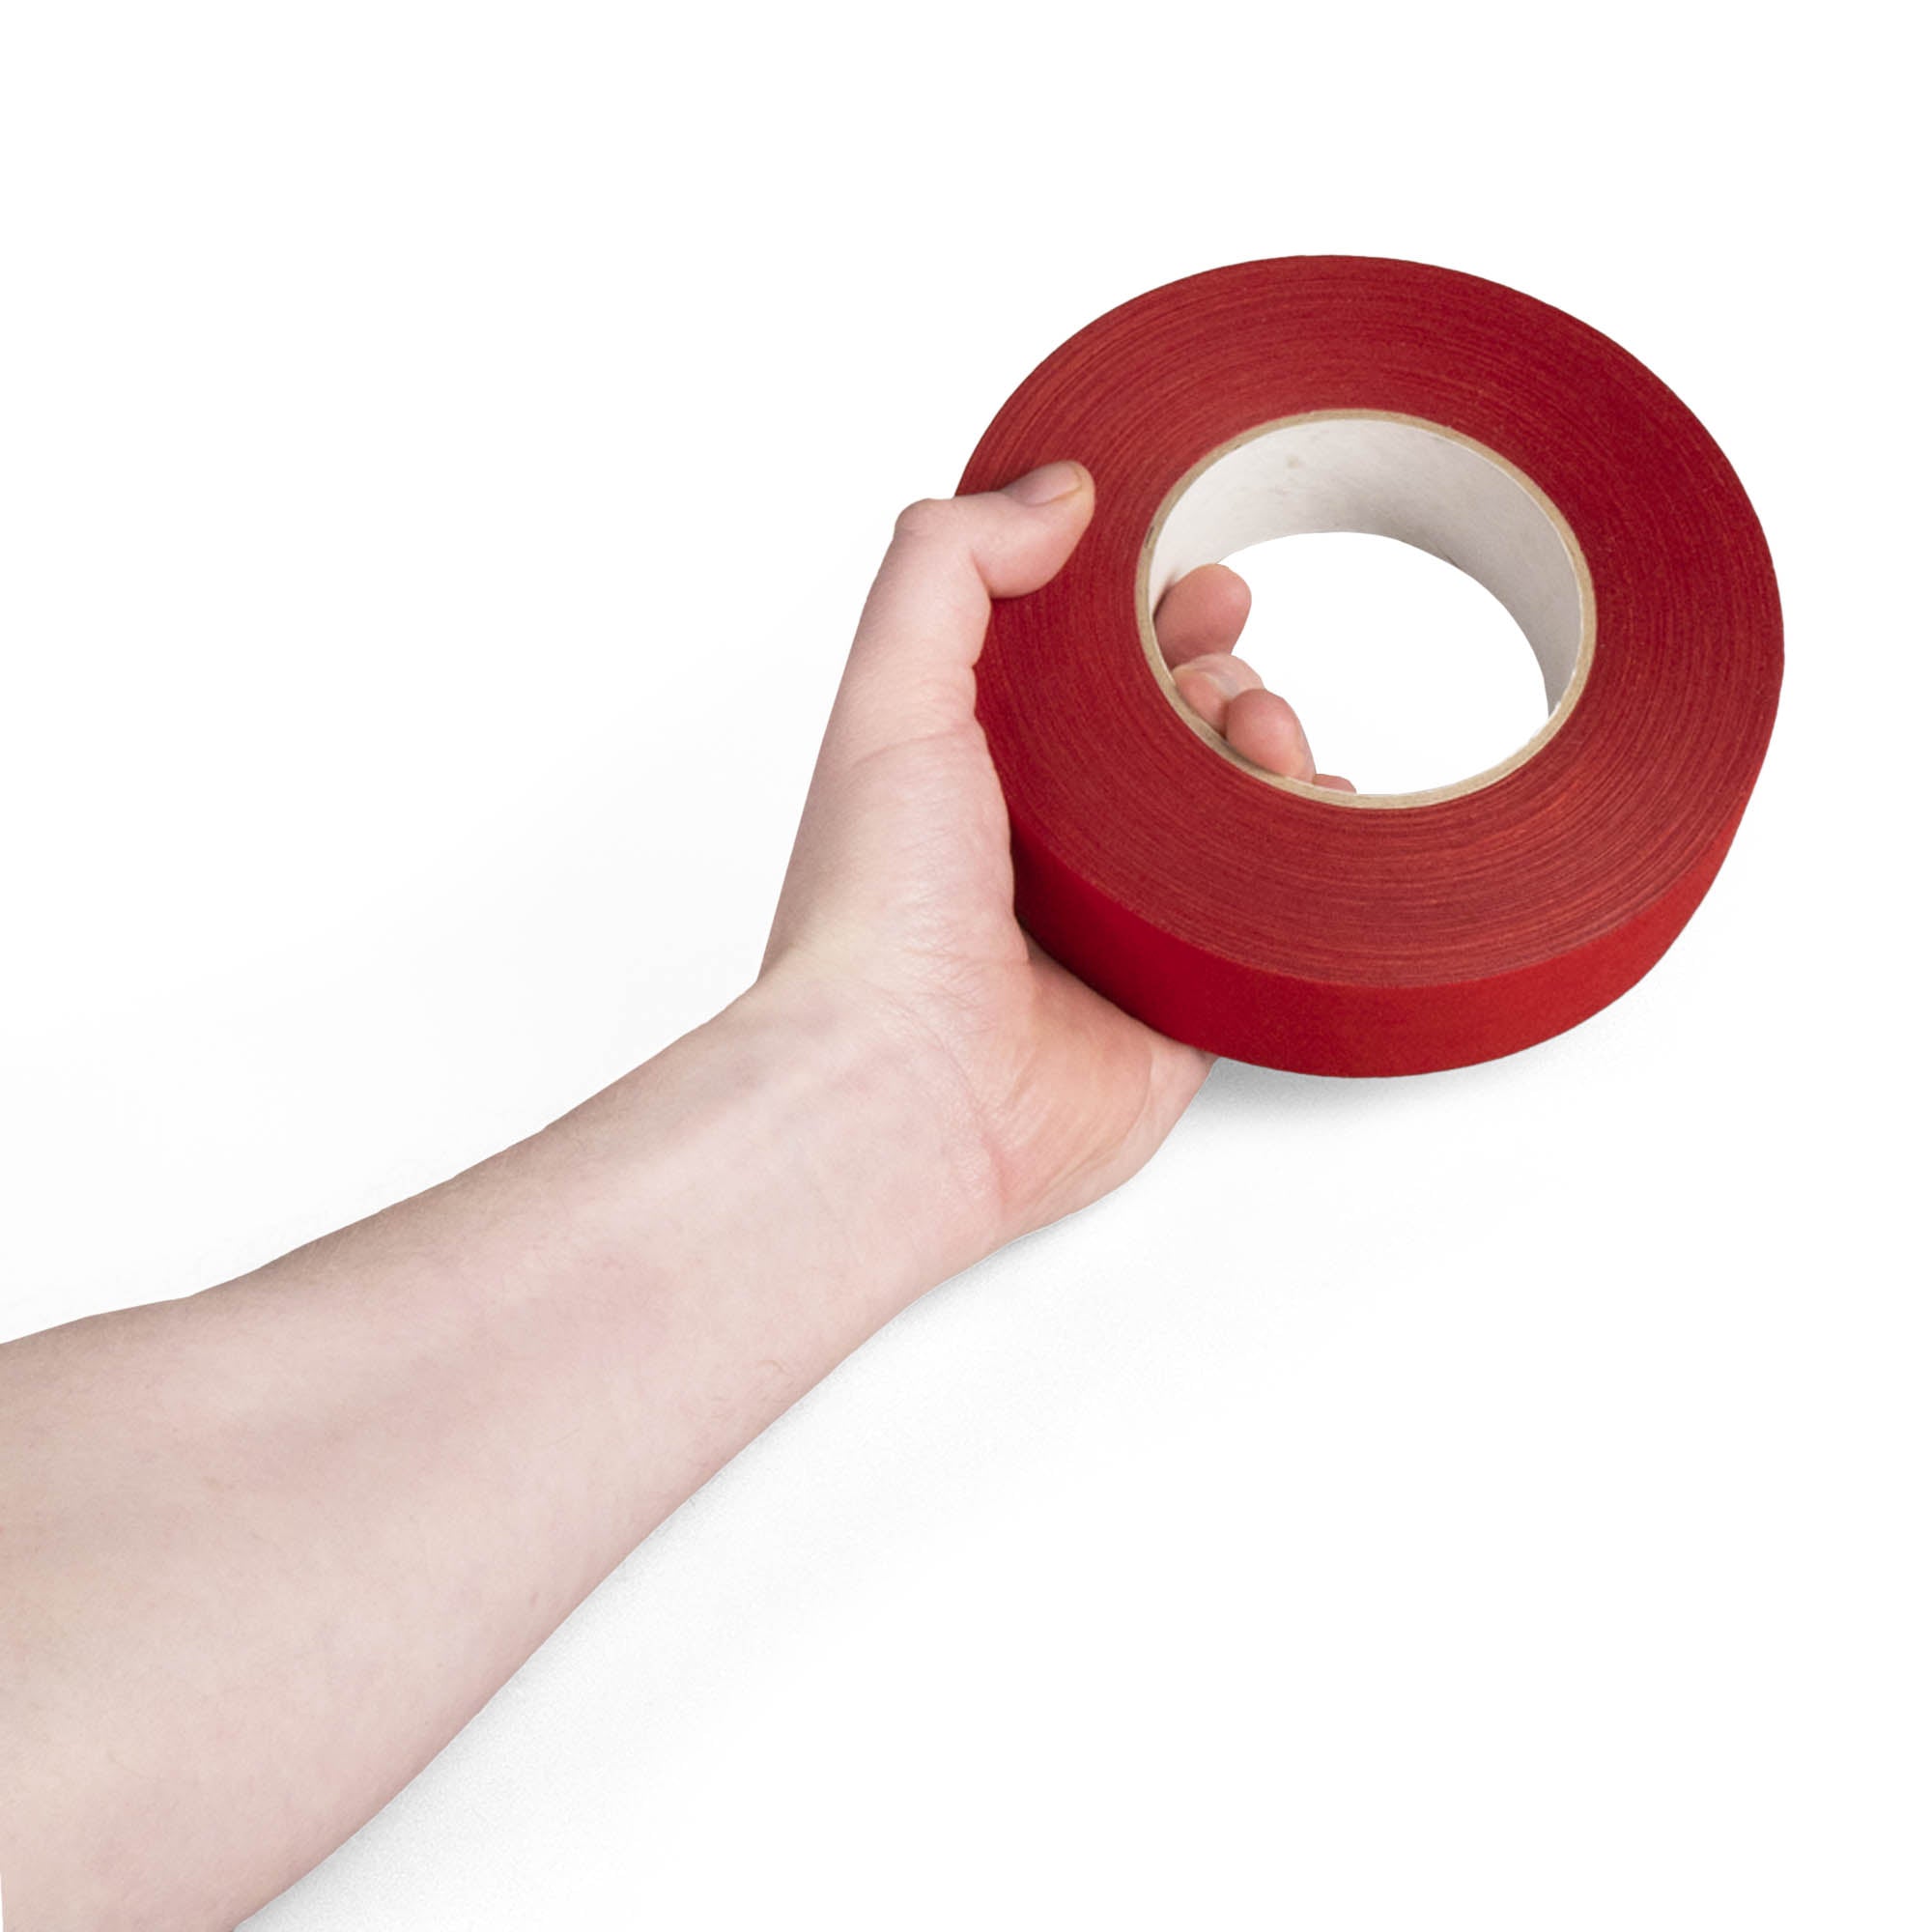 red 3.8cm wide tape in hand